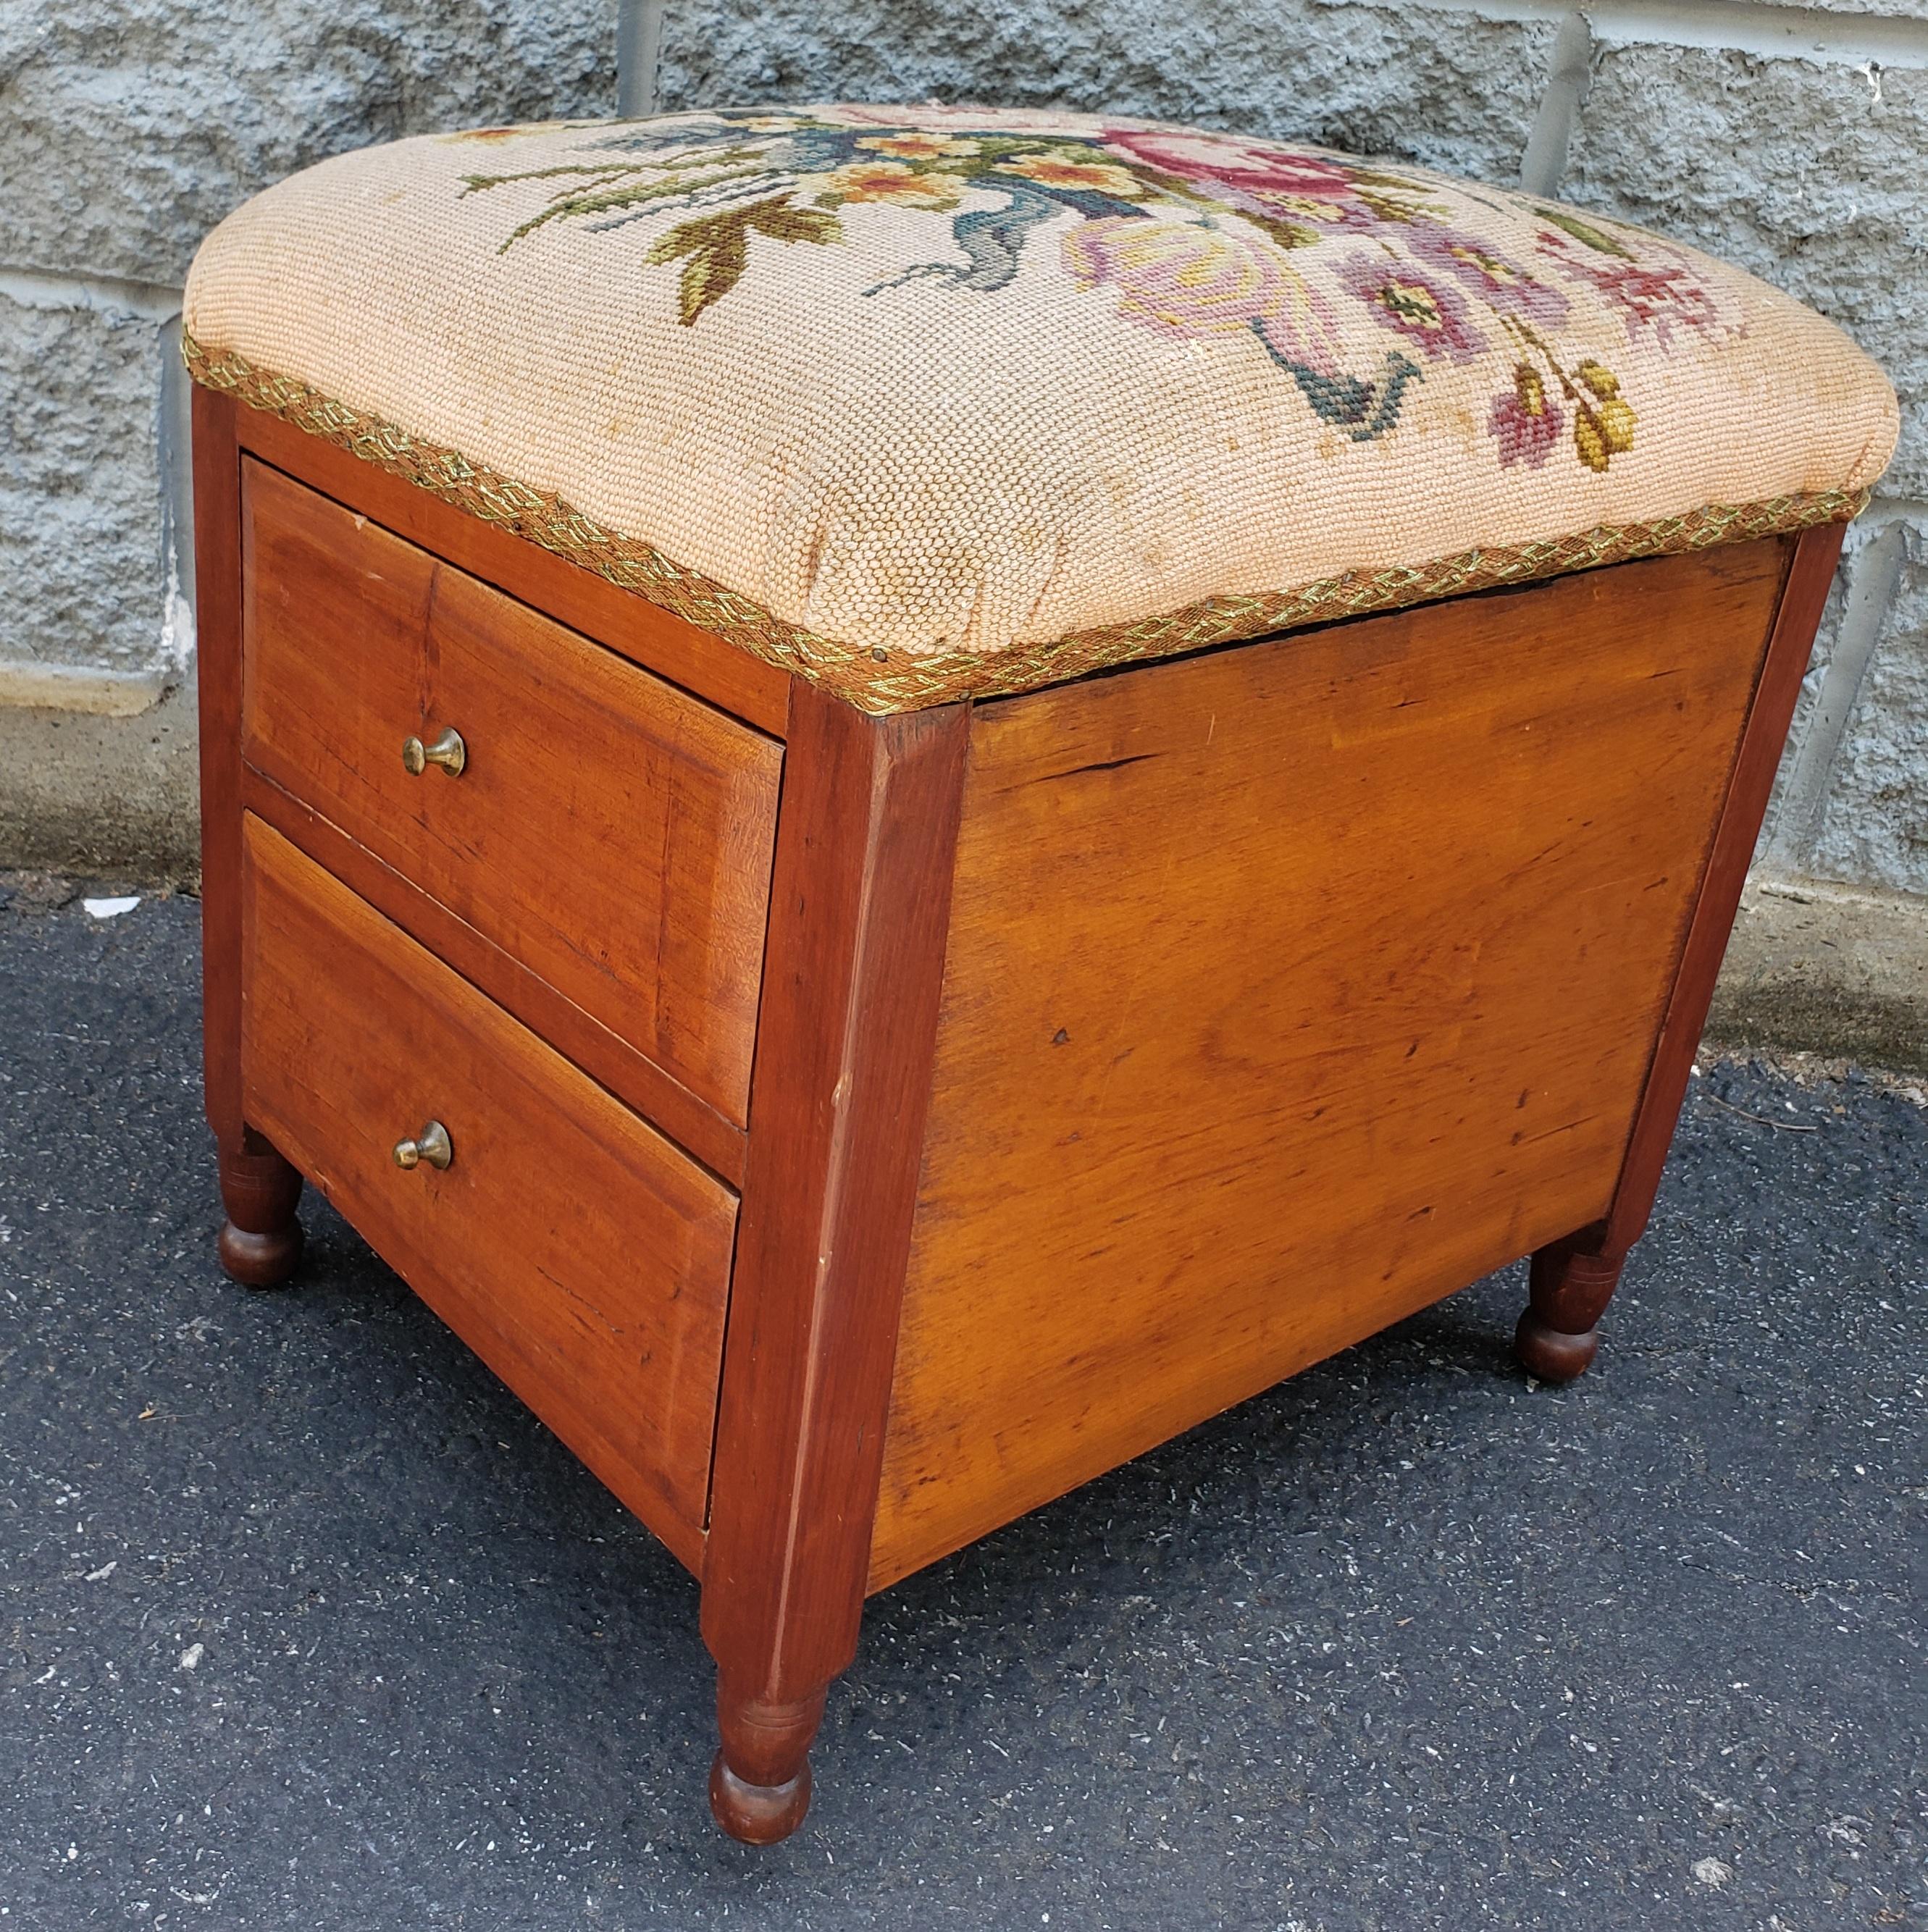 Upholstery Victorian Two-Drawer Mahogany Needlework Upholstered Stool on Wheels For Sale